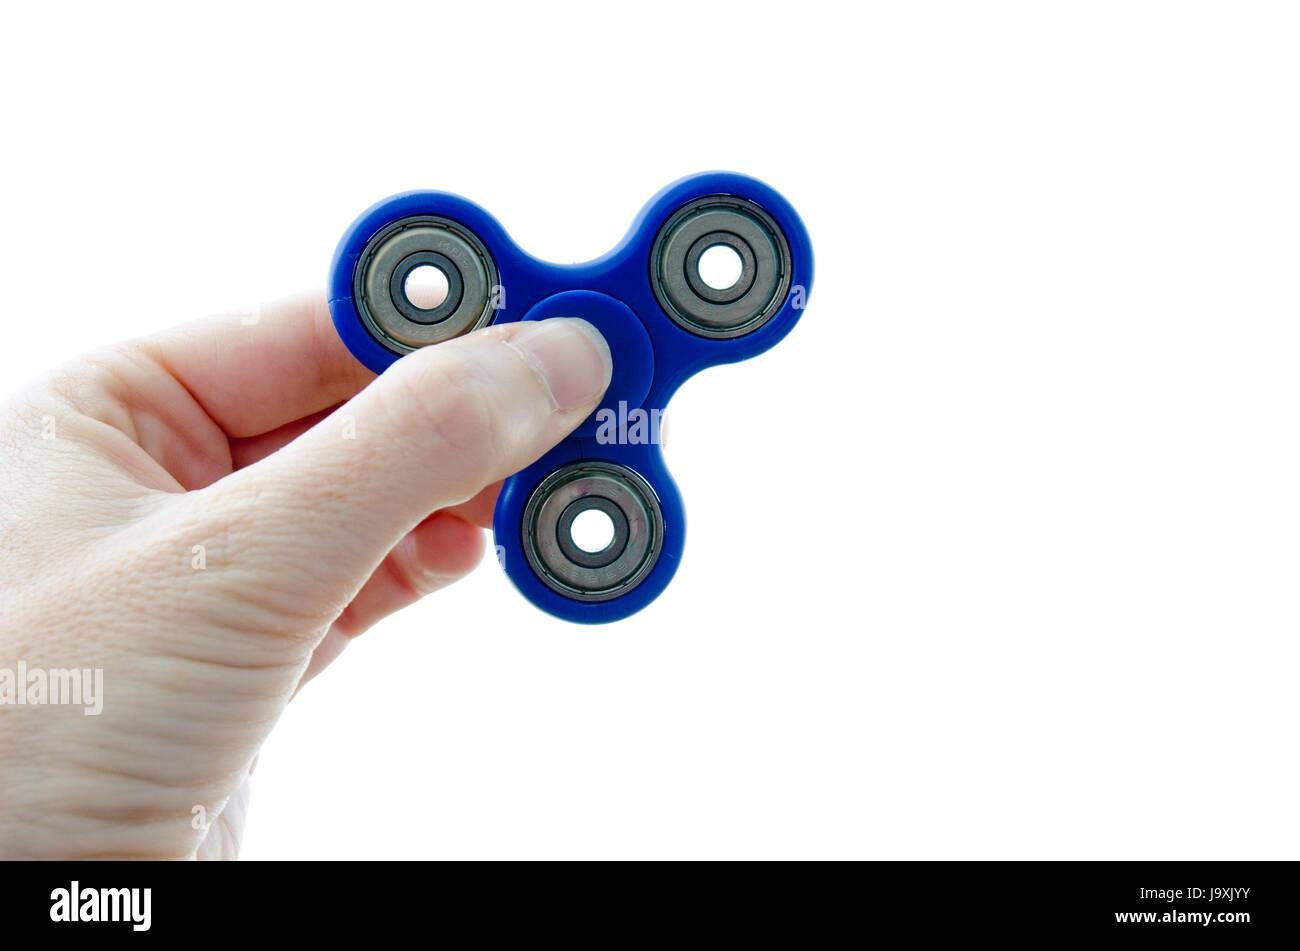 Hand holding up a blue fidget spinner against a white background Stock Photo